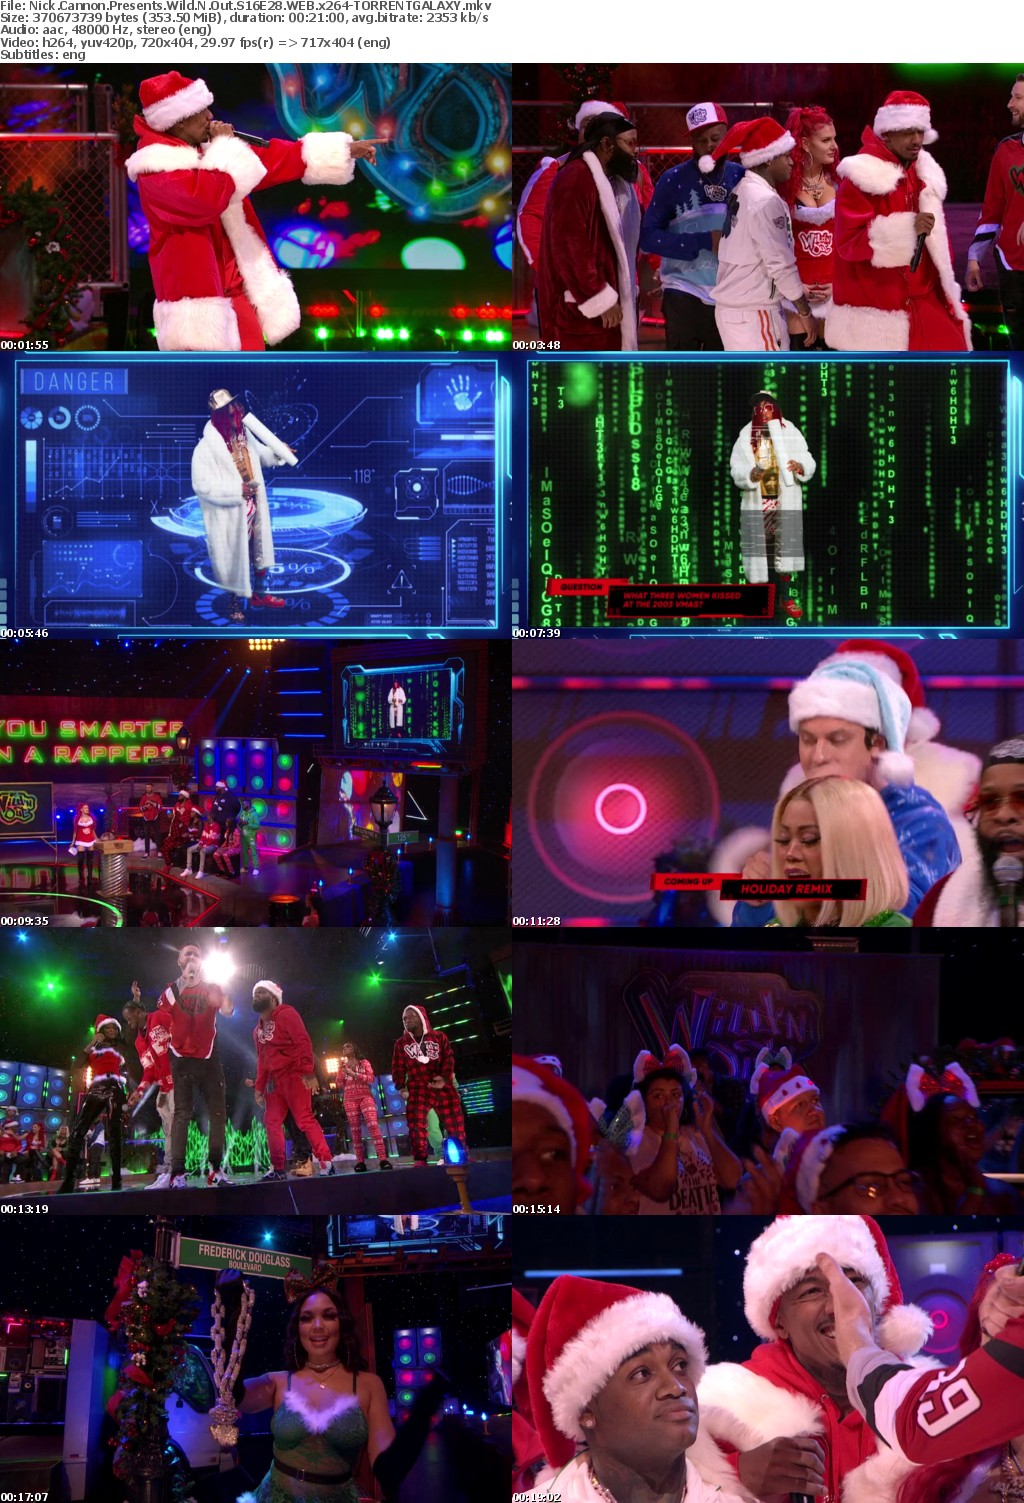 Nick Cannon Presents Wild N Out S16E28 WEB x264-GALAXY